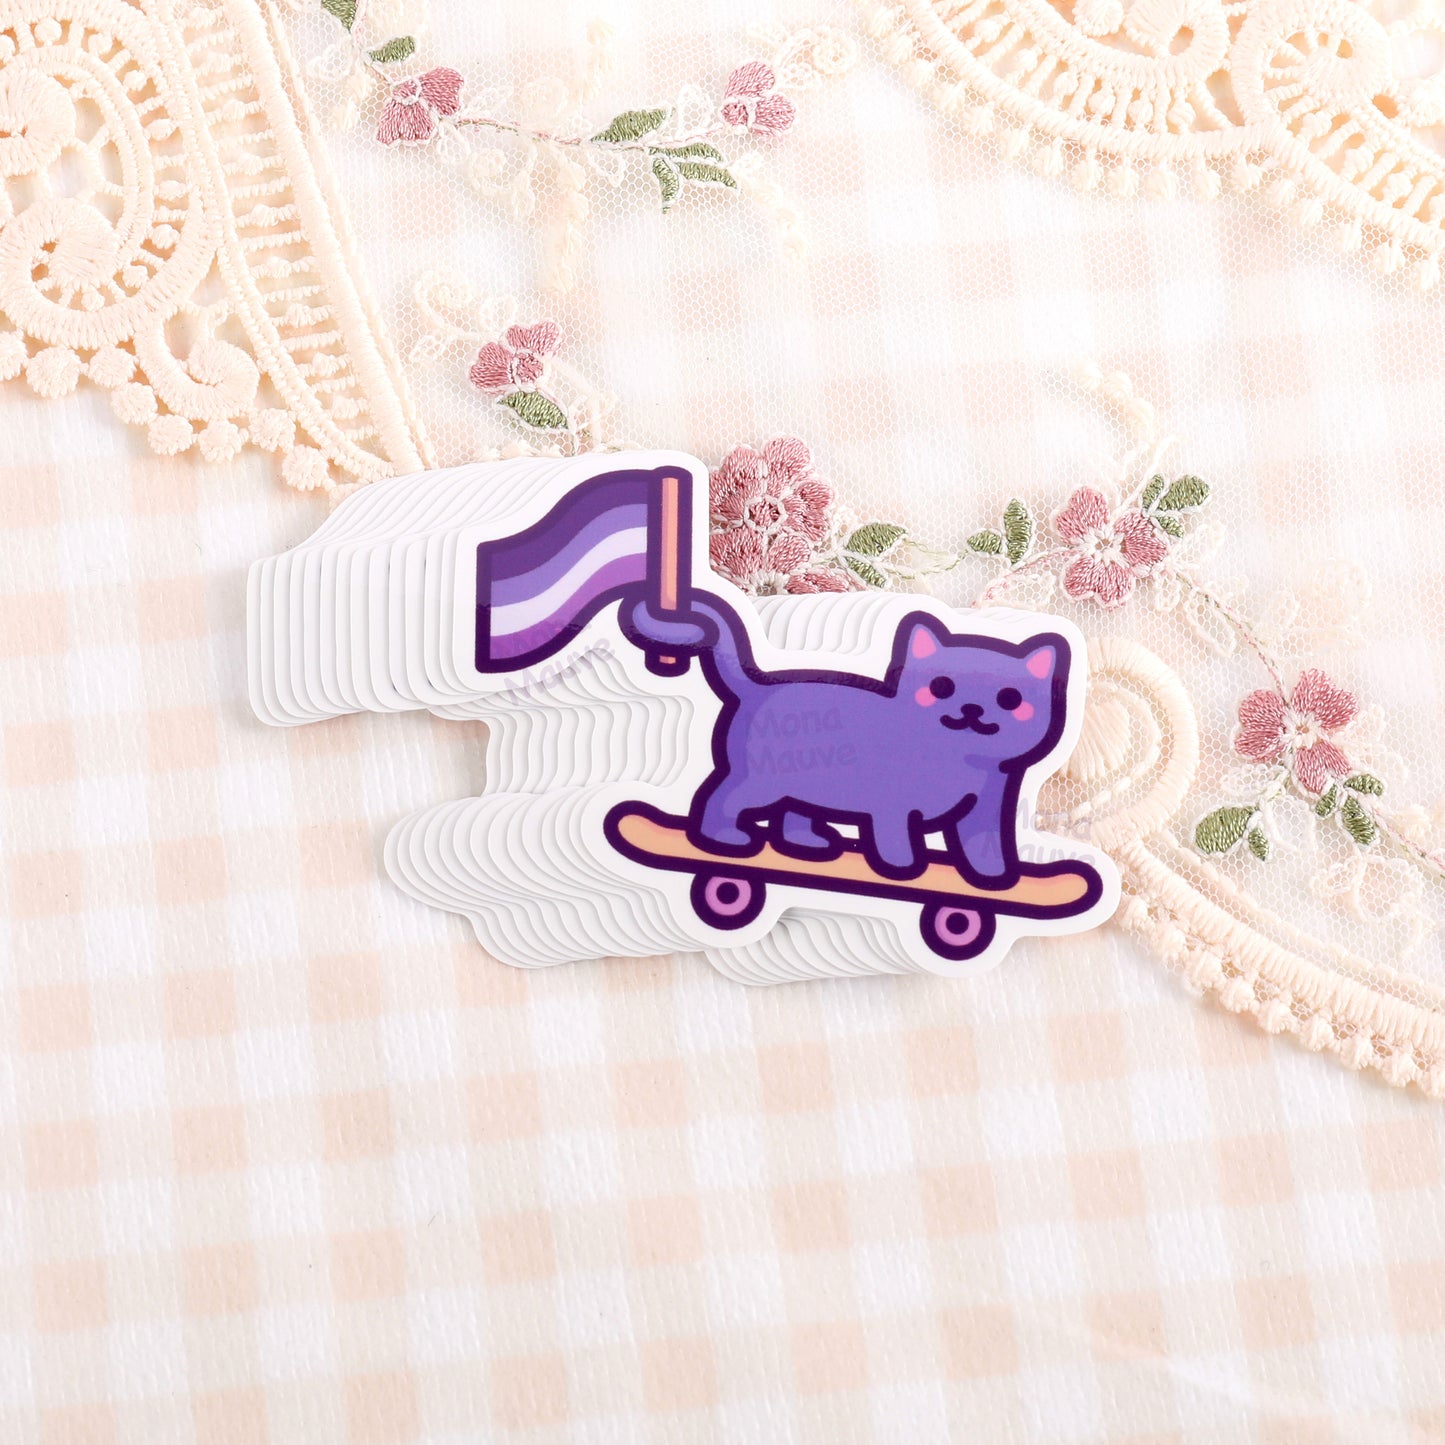 Asexual Pride Sticker | Ace Flag Cat on Skateboard